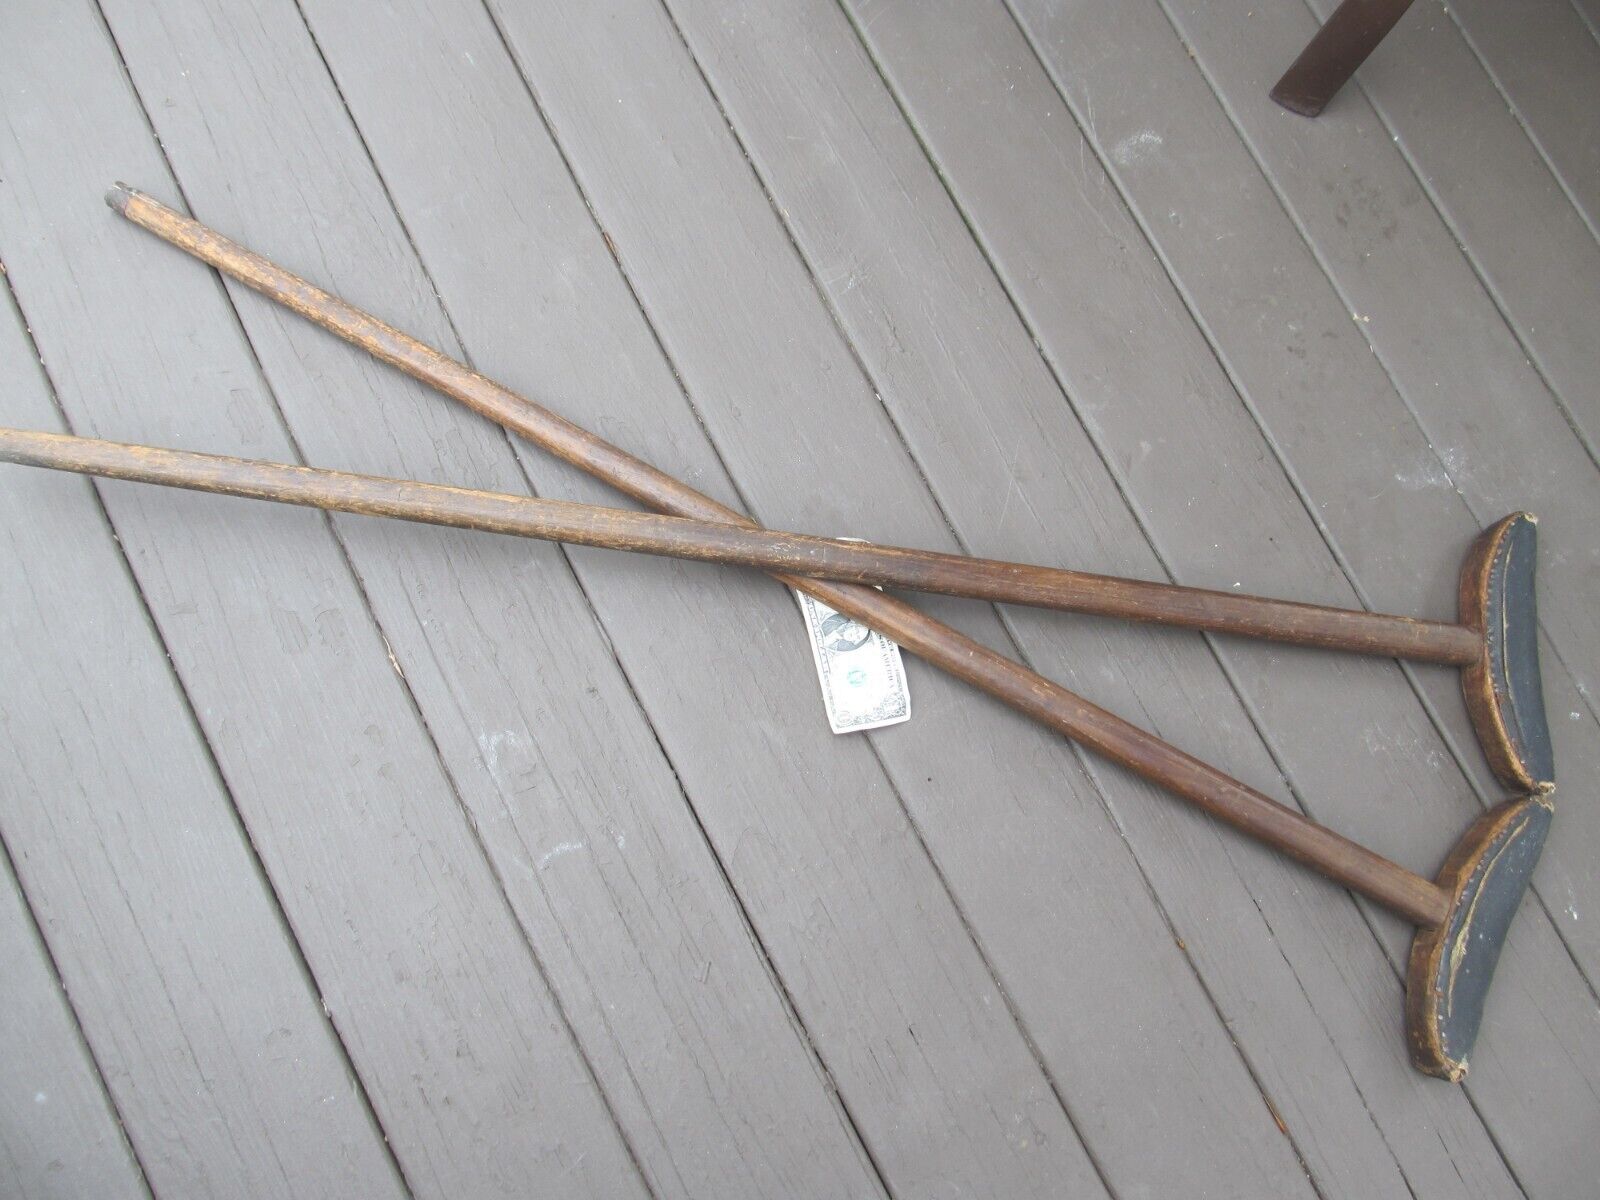 RARE PAIR CIVIL WAR Crutches, MARKED US MEDICAL DEPT, Wounded, Hospital, Doctor